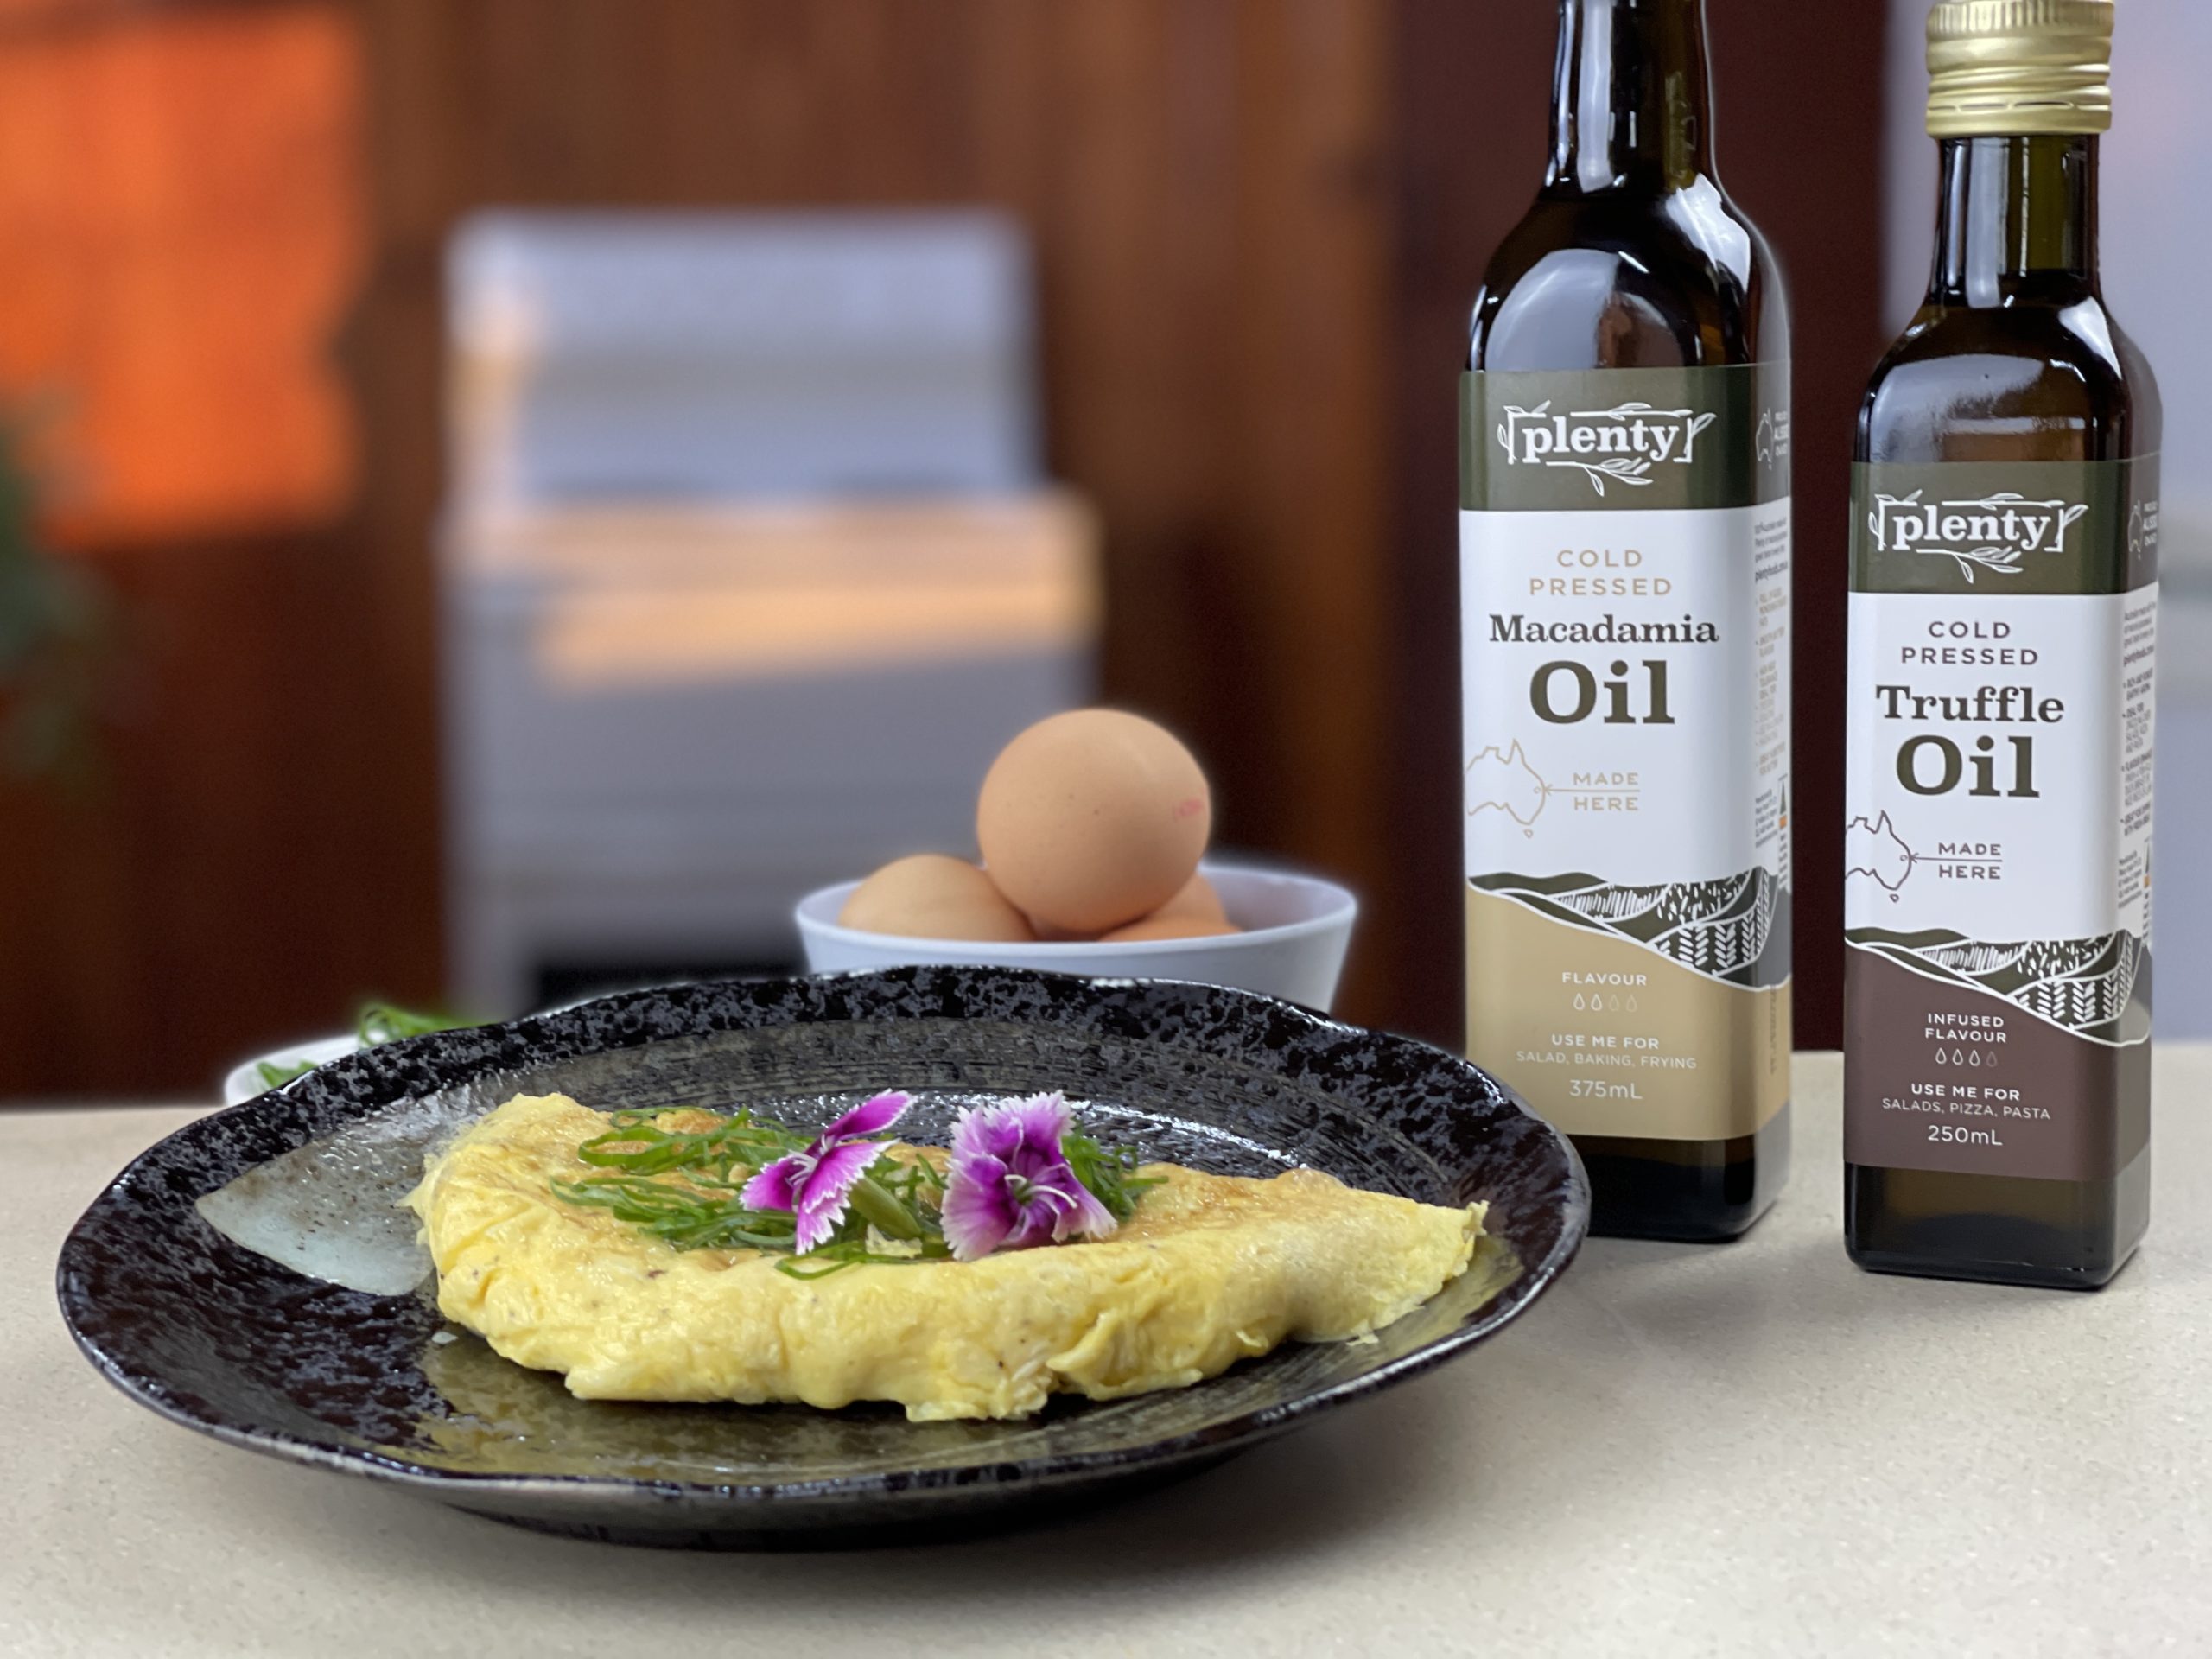 Bottles of Plenty Macadamia Oil and Plenty Truffle Oil. A plate with omelette and truffle and macadamia oil.